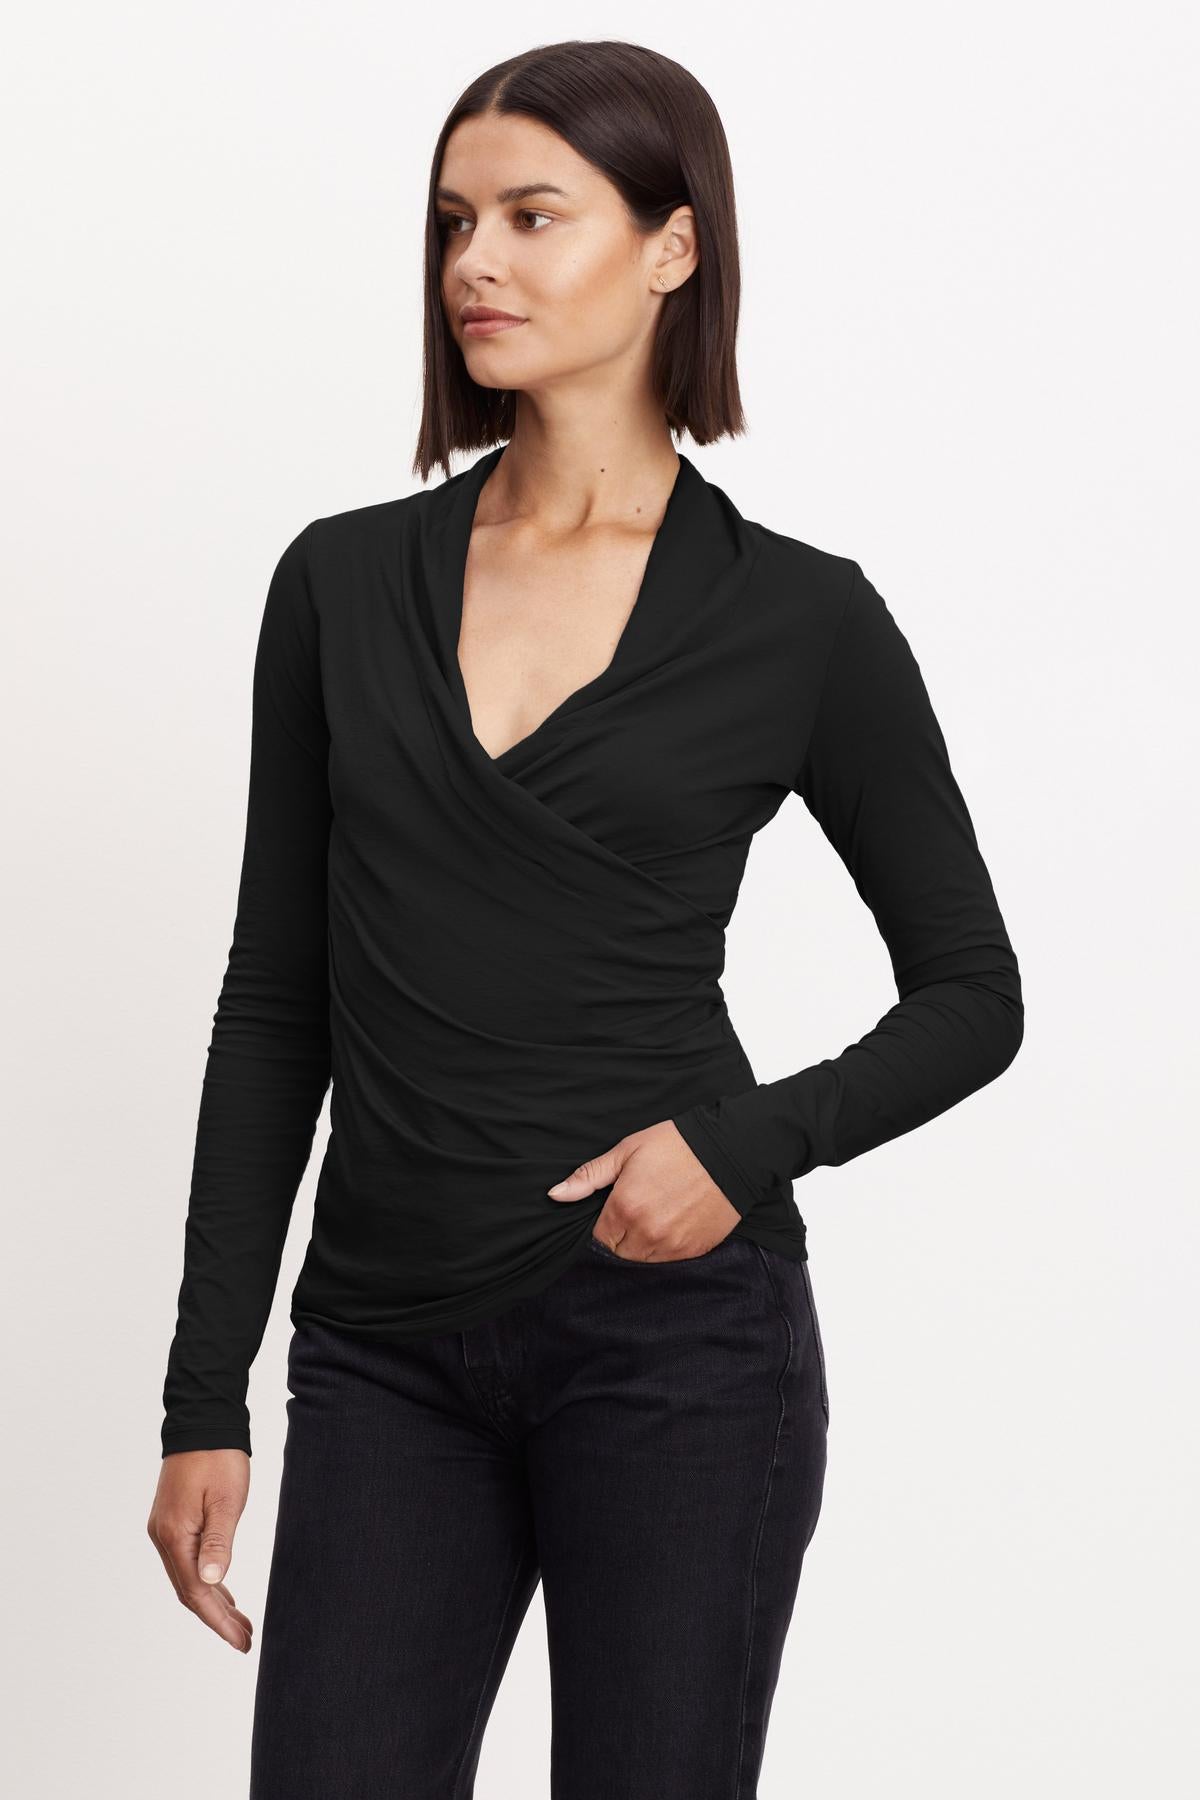 A woman wearing a black long-sleeved Velvet by Graham & Spencer MERI Wrap Front Fitted Top with clean lines.-26921359376577